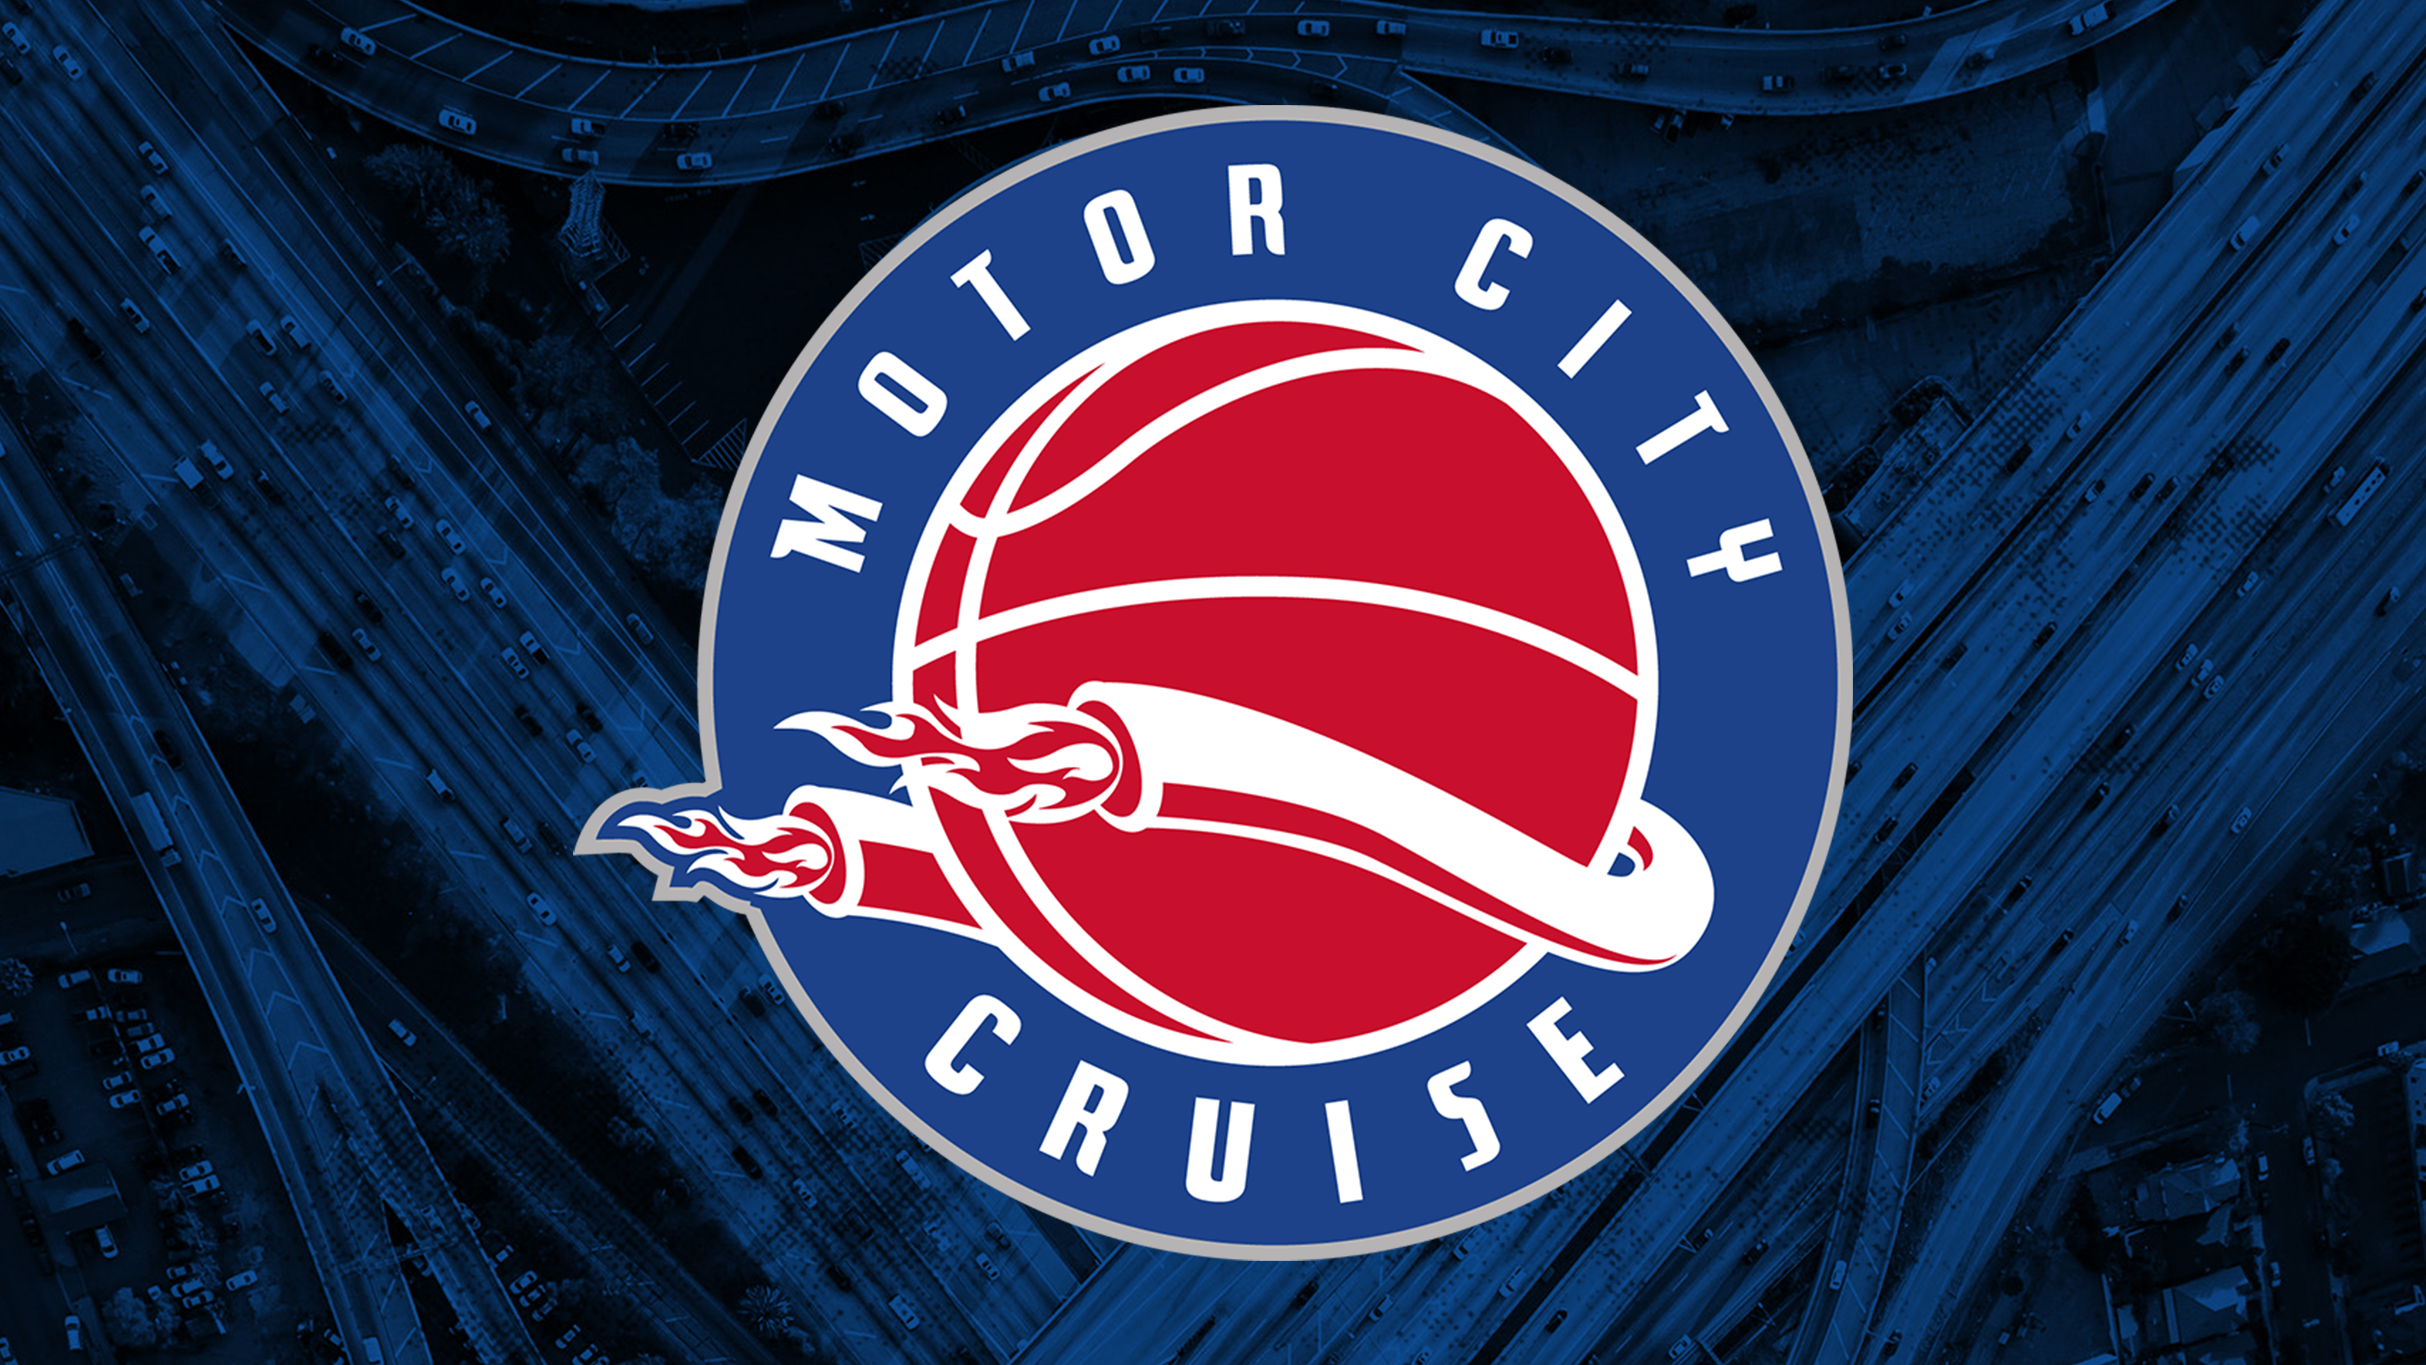 Motor City Cruise v South Bay Lakers (Thirsty Thursday) in Detroit promo photo for 2 For 1 presale offer code